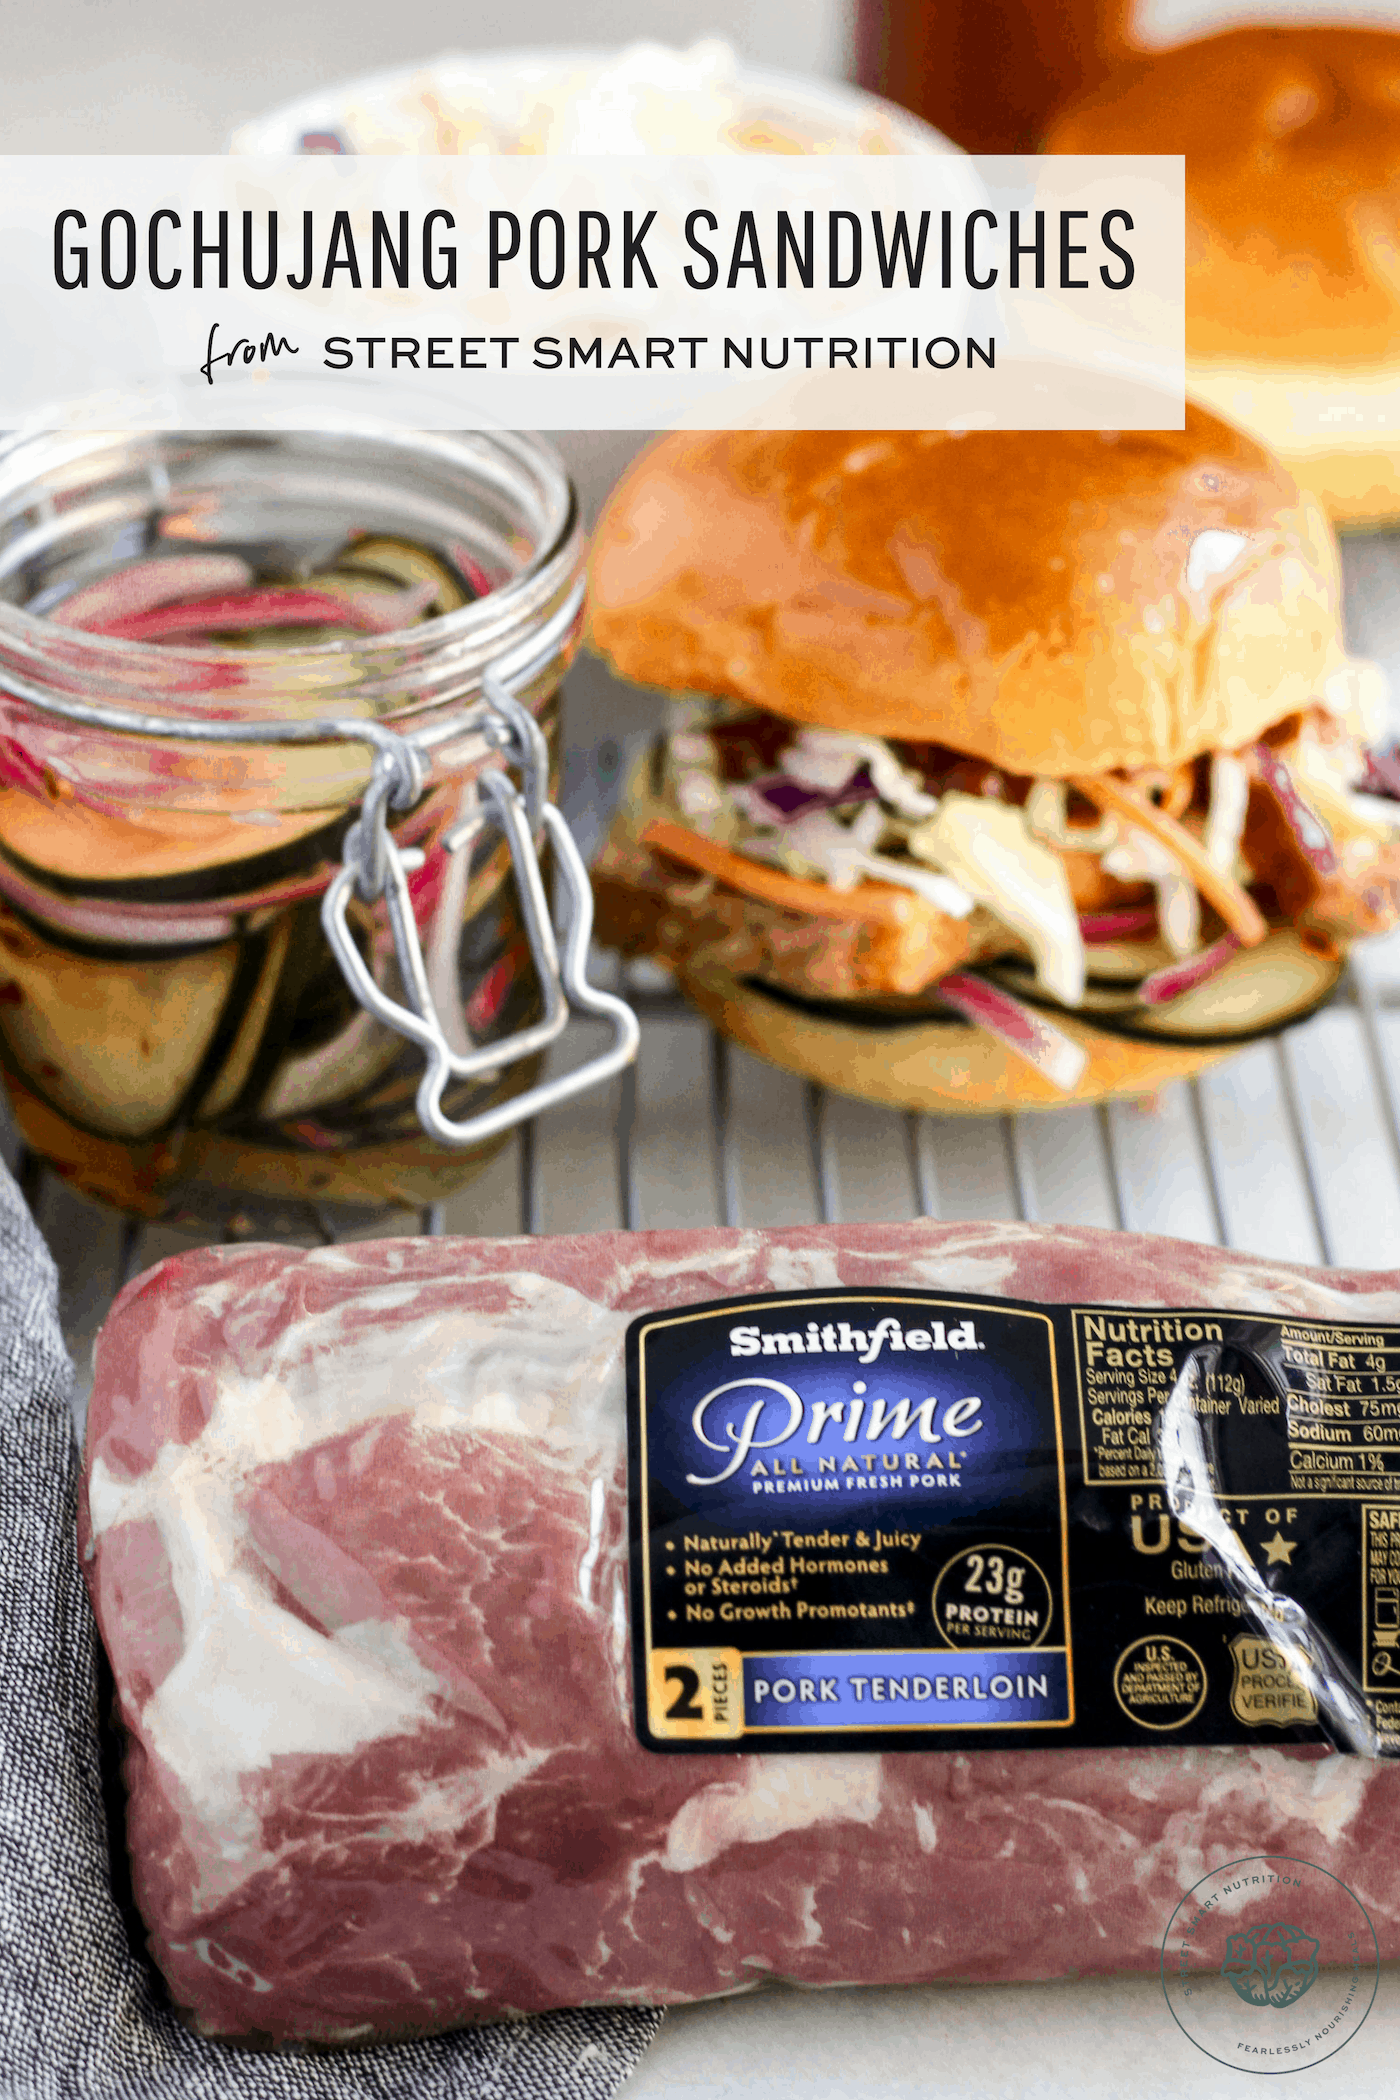 Gochujang Pork Sandwiches | Shake things up with this hearty sandwich from Street Smart Nutrition!